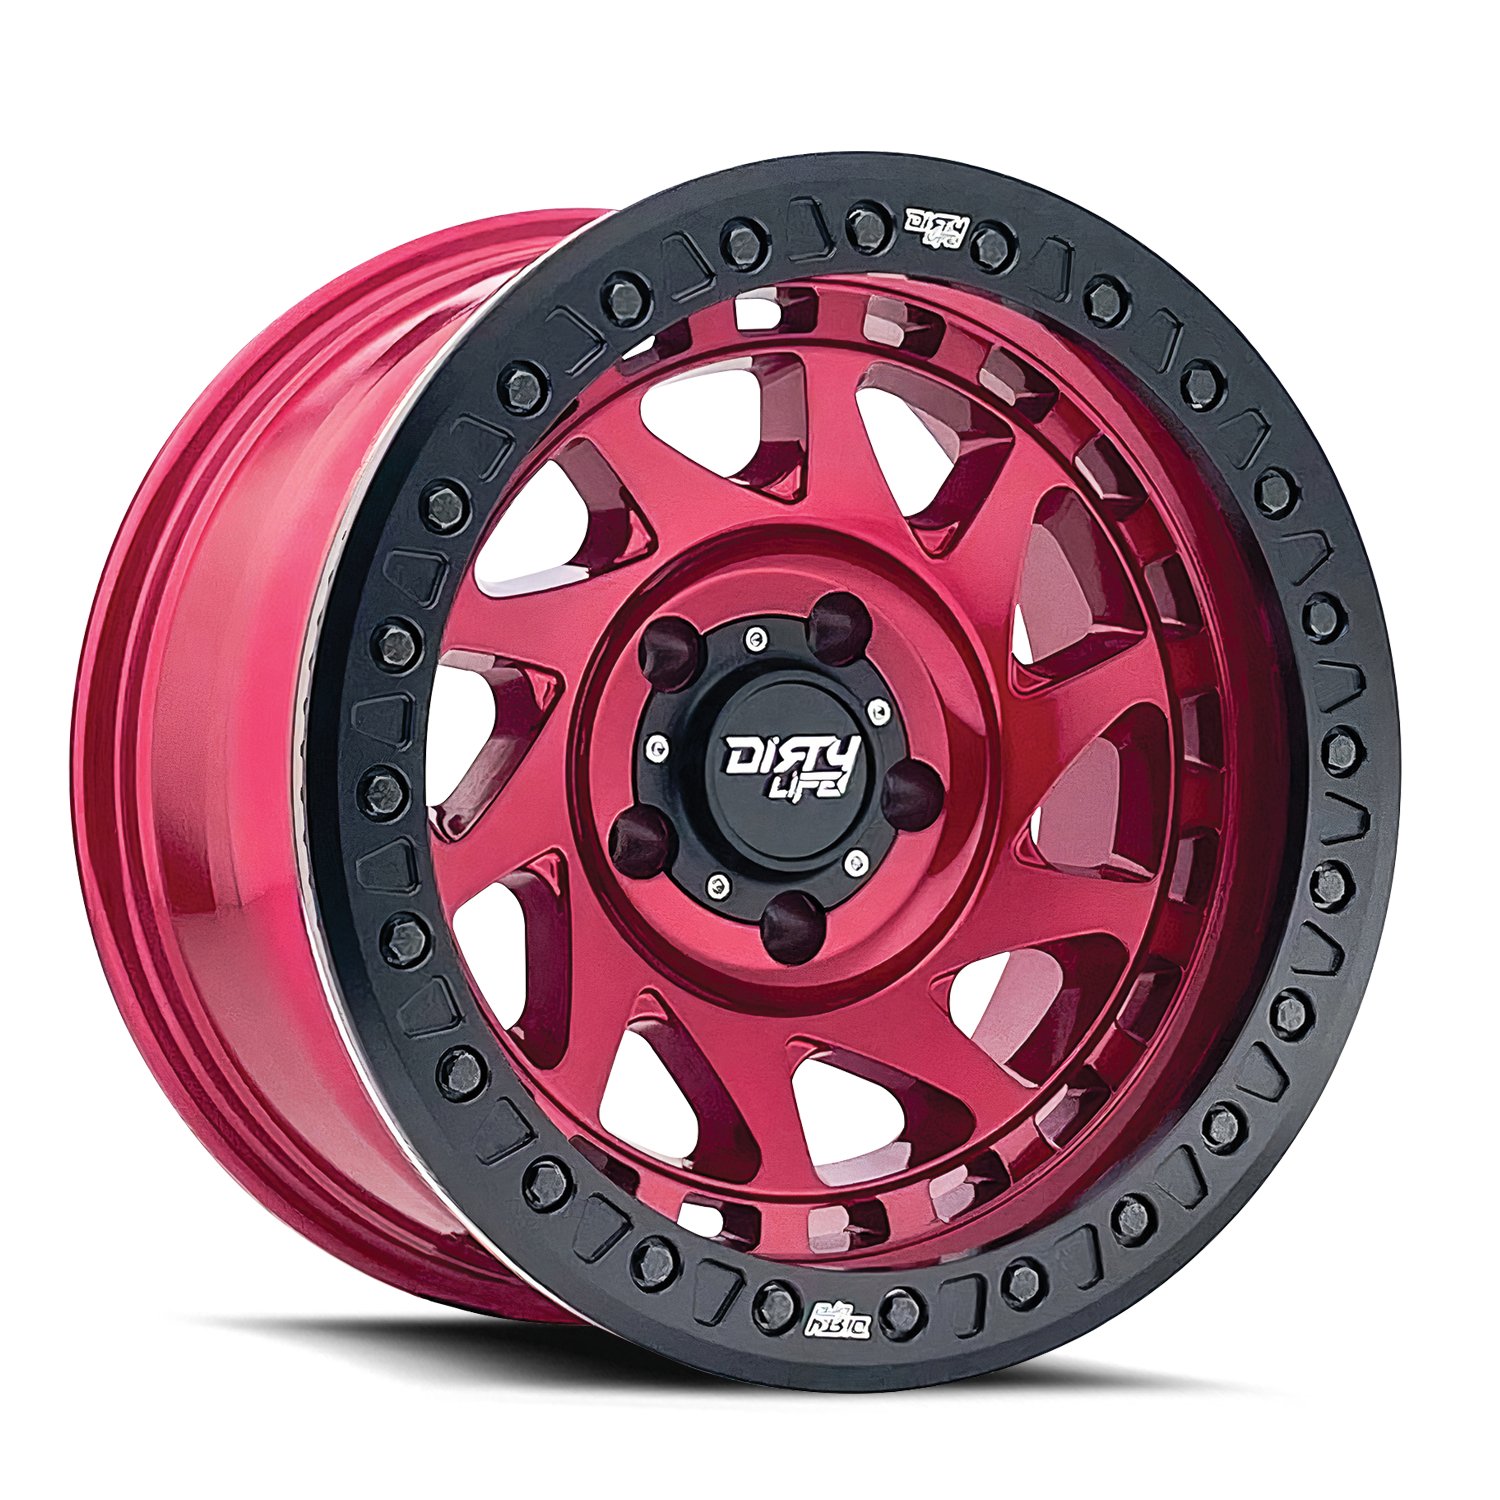 ENIGMA RACE 9313 Wheel Size: 17 X 9" Bolt Pattern: 8-170 [CRIMSON CANDY RED]